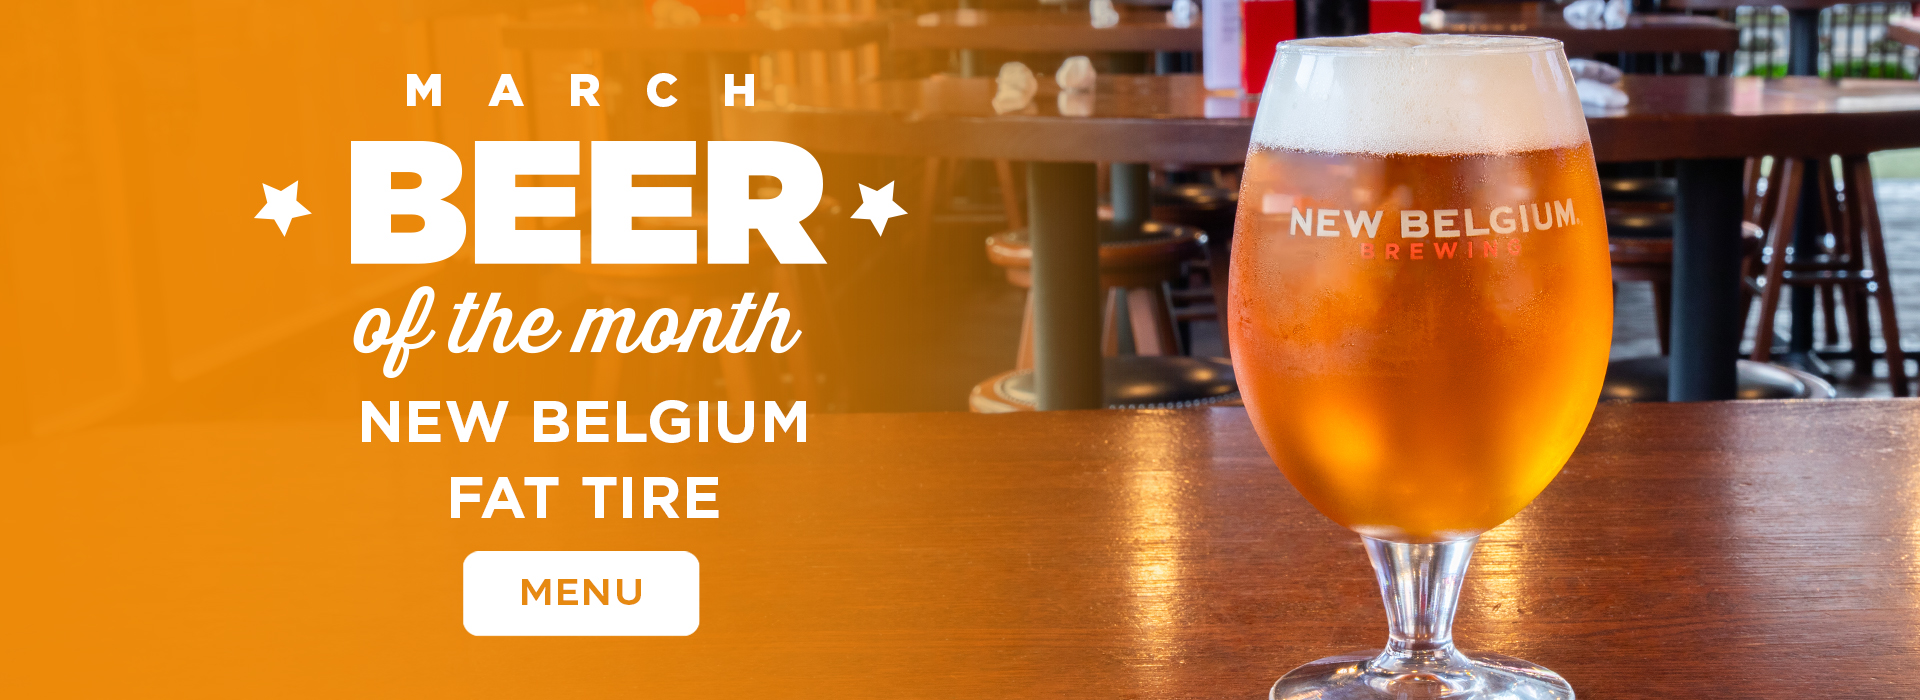 click or tap here to view our beer of the month!